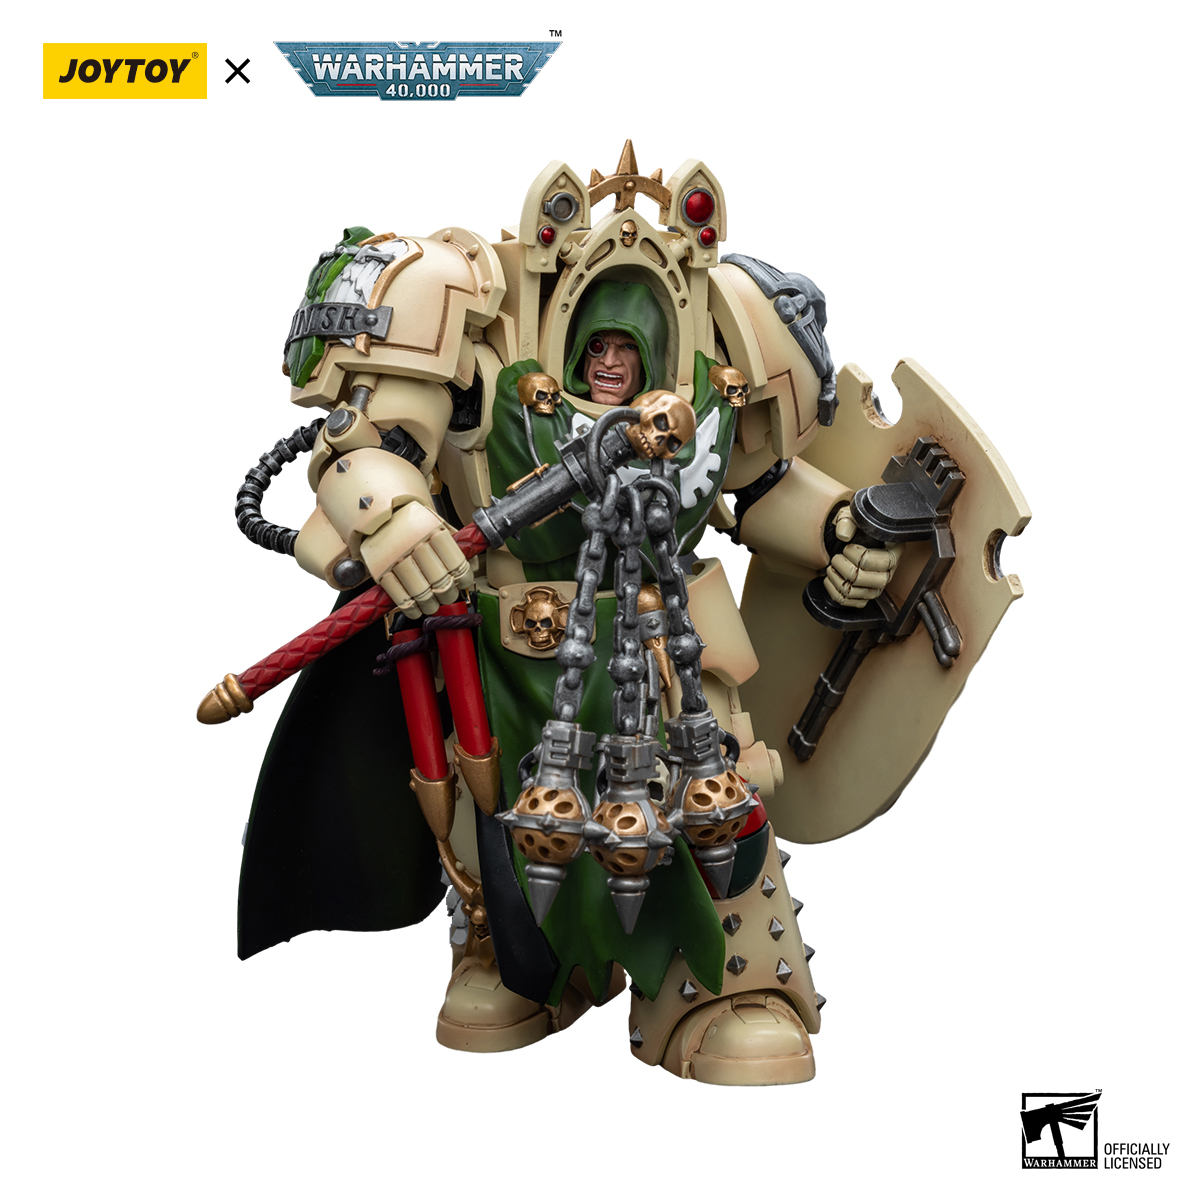 [JOYTOY] Dark Angels Deathwing Knight Master with Flail of the Unforgiven-1709890566-fngud.jpg